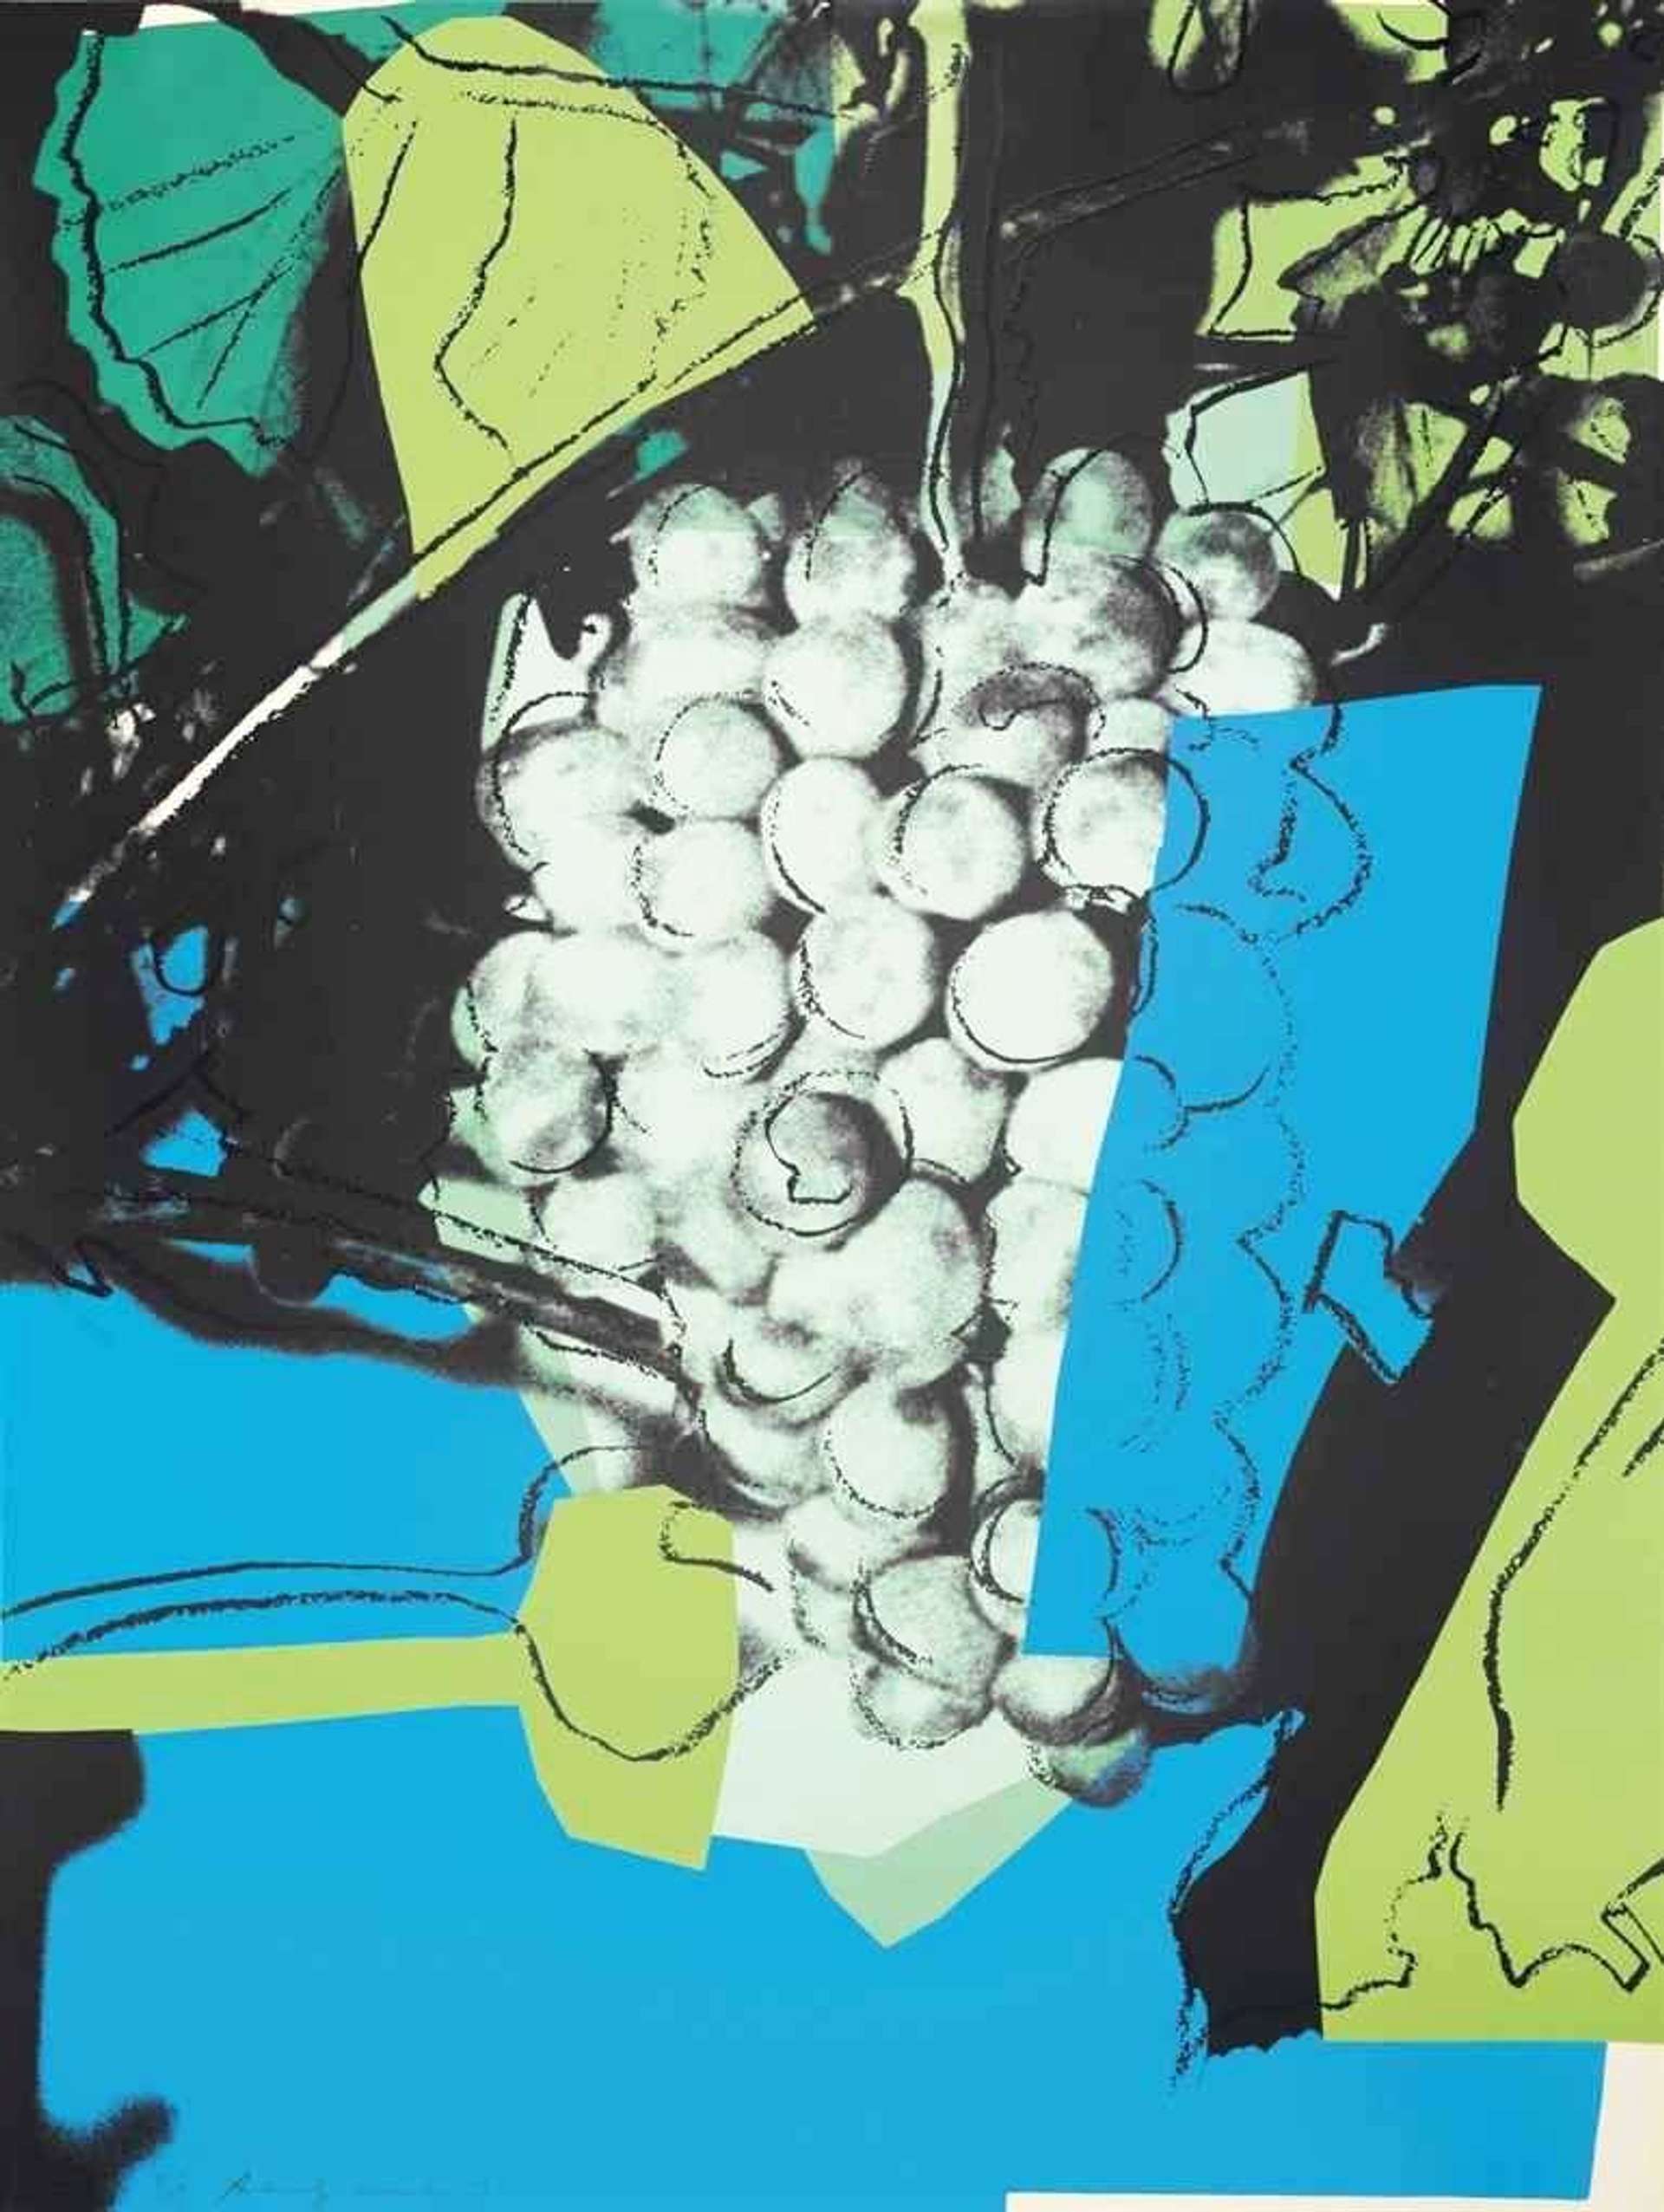 Grapes (F. & S. II.193) by Andy Warhol